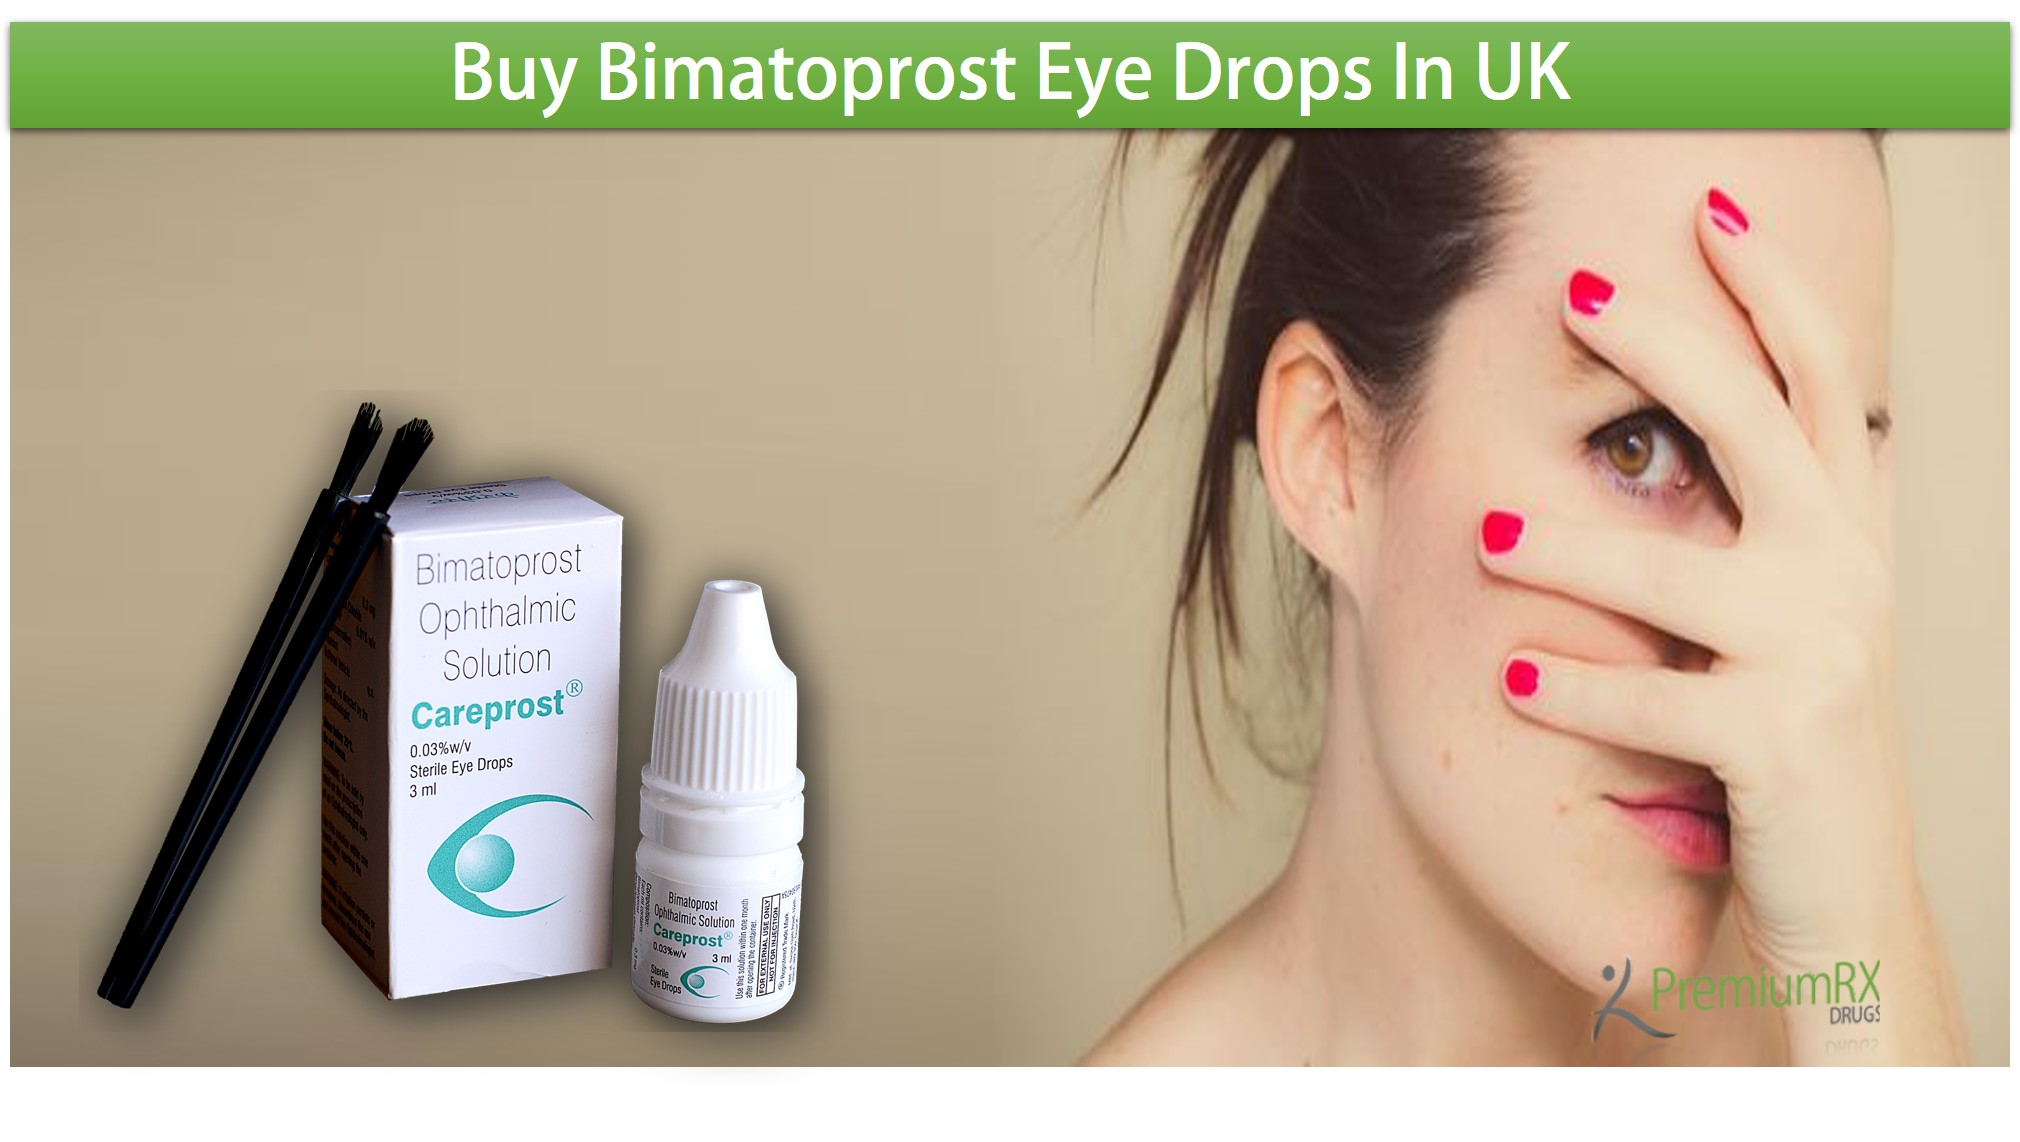 Careprost Eye Drop Work and Side Effects